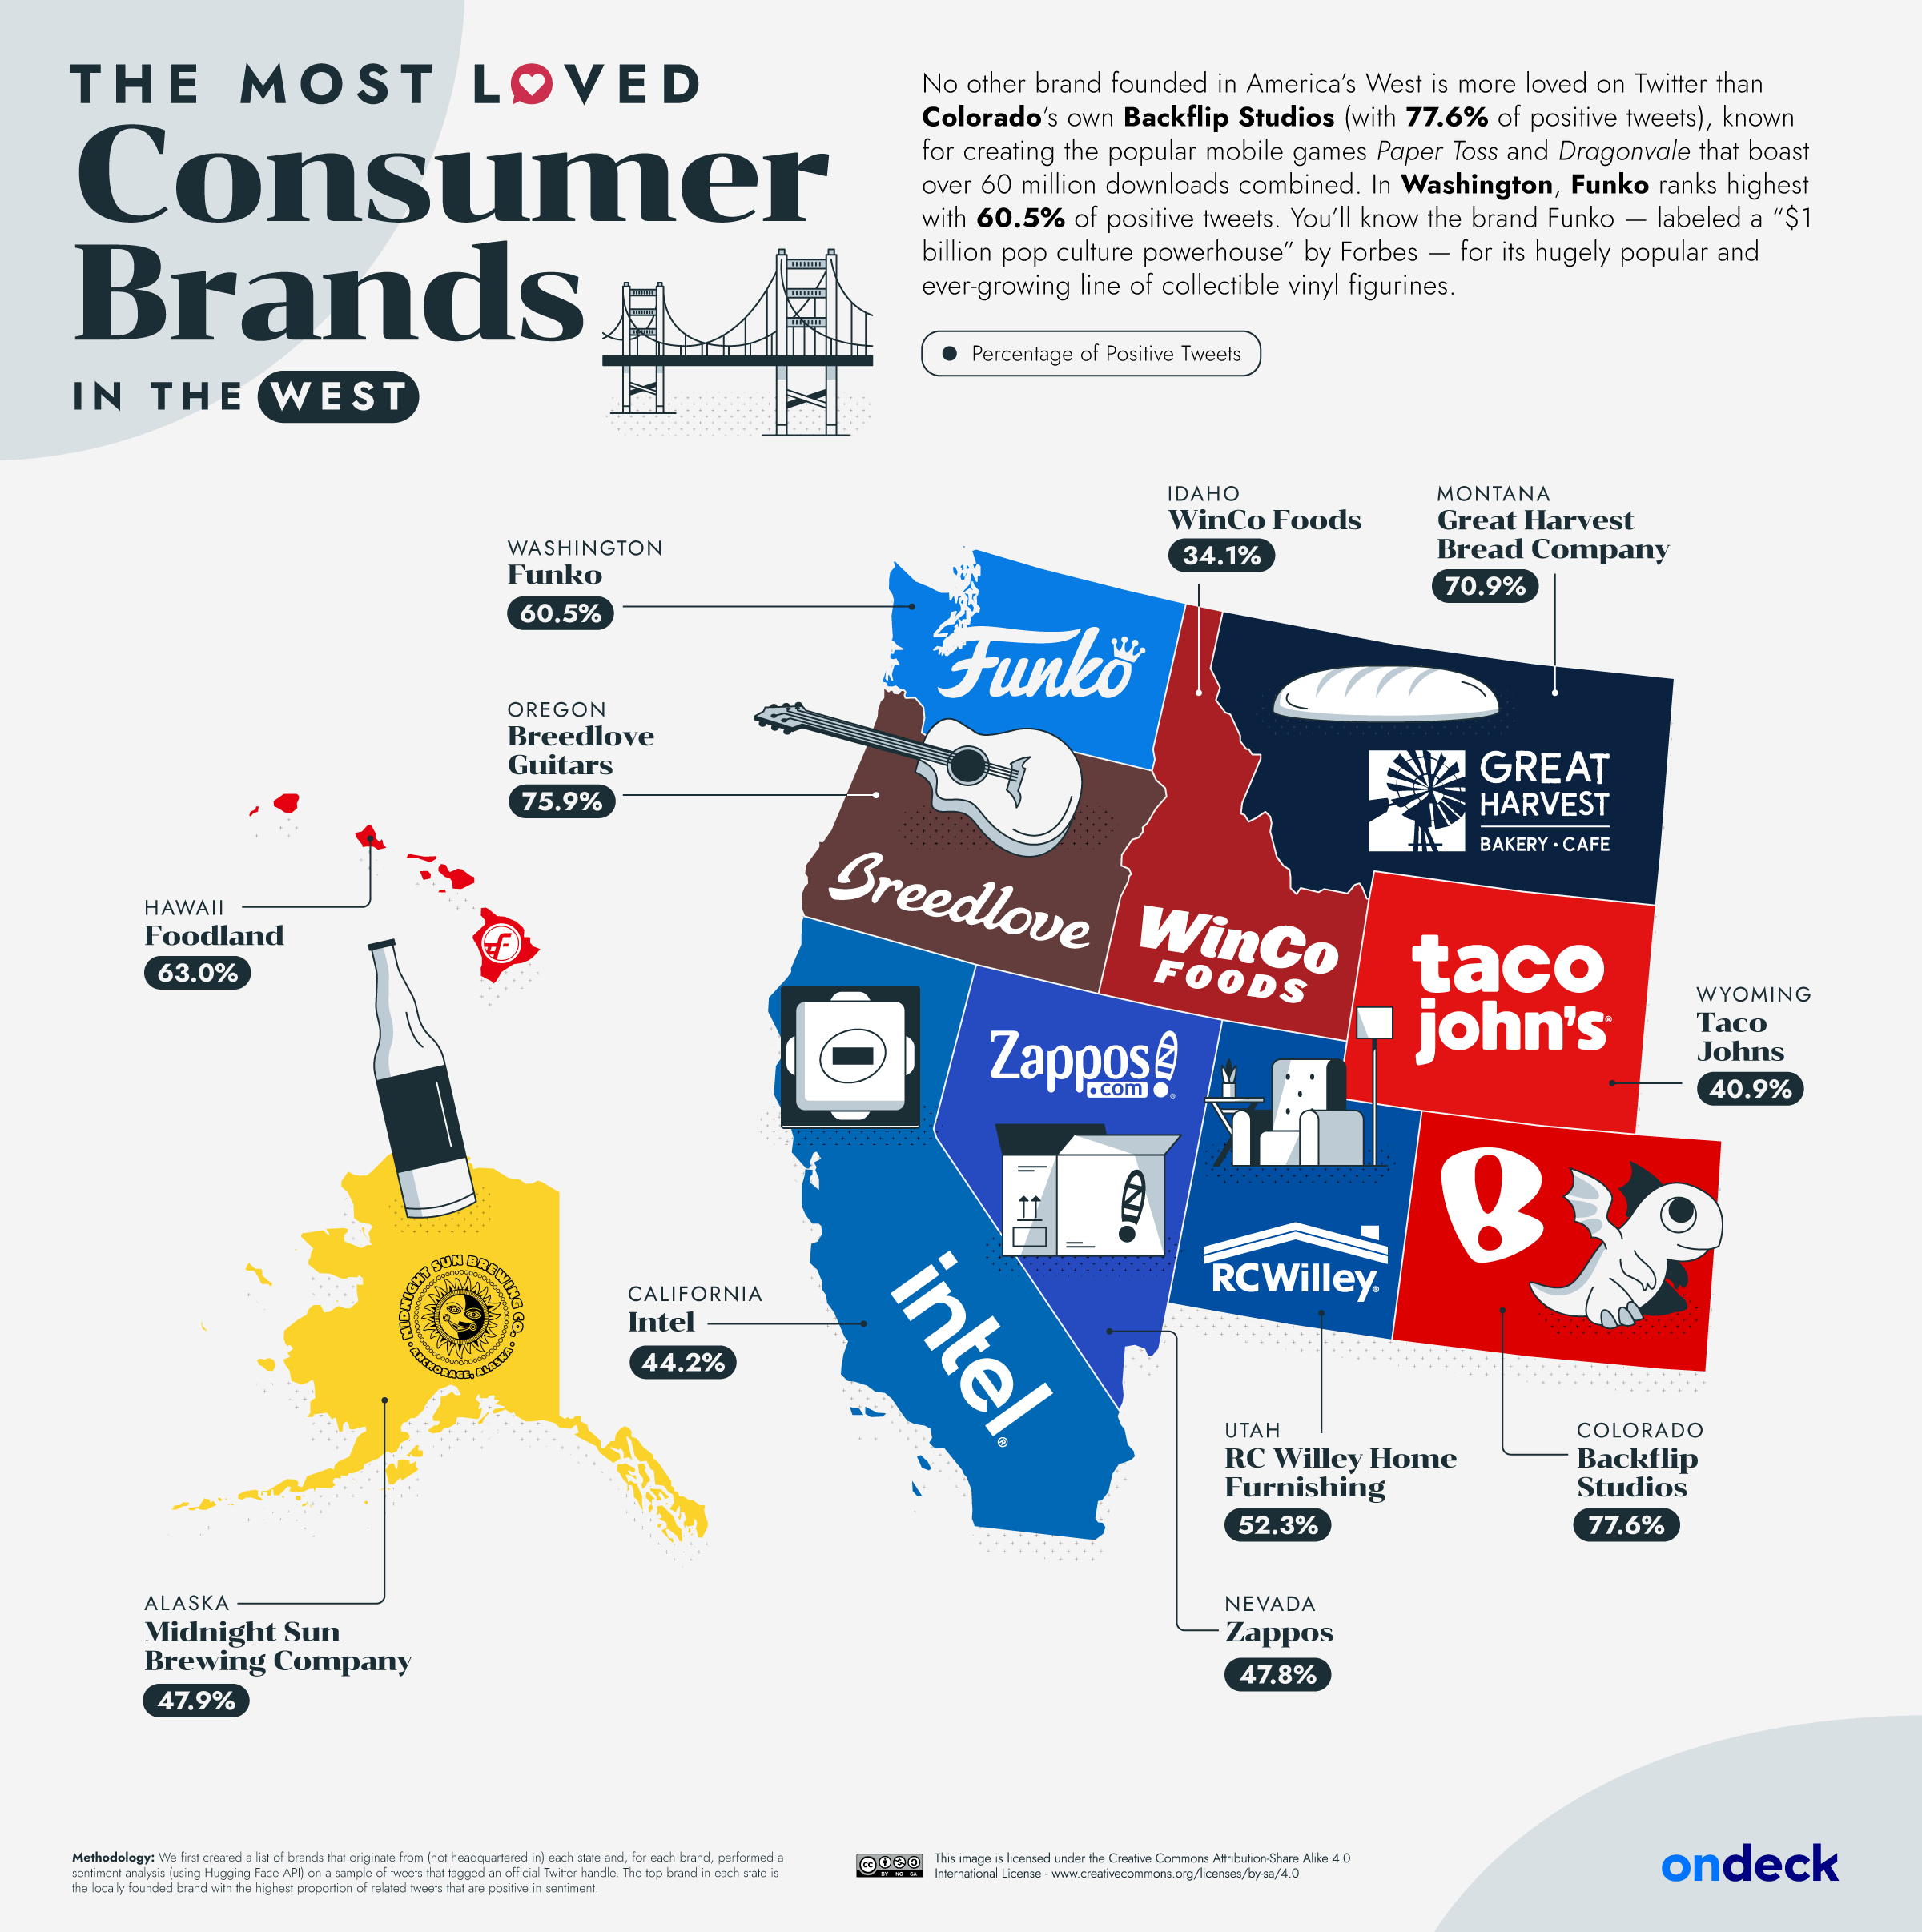 Map of the most loved consumer brands in the U.S. west